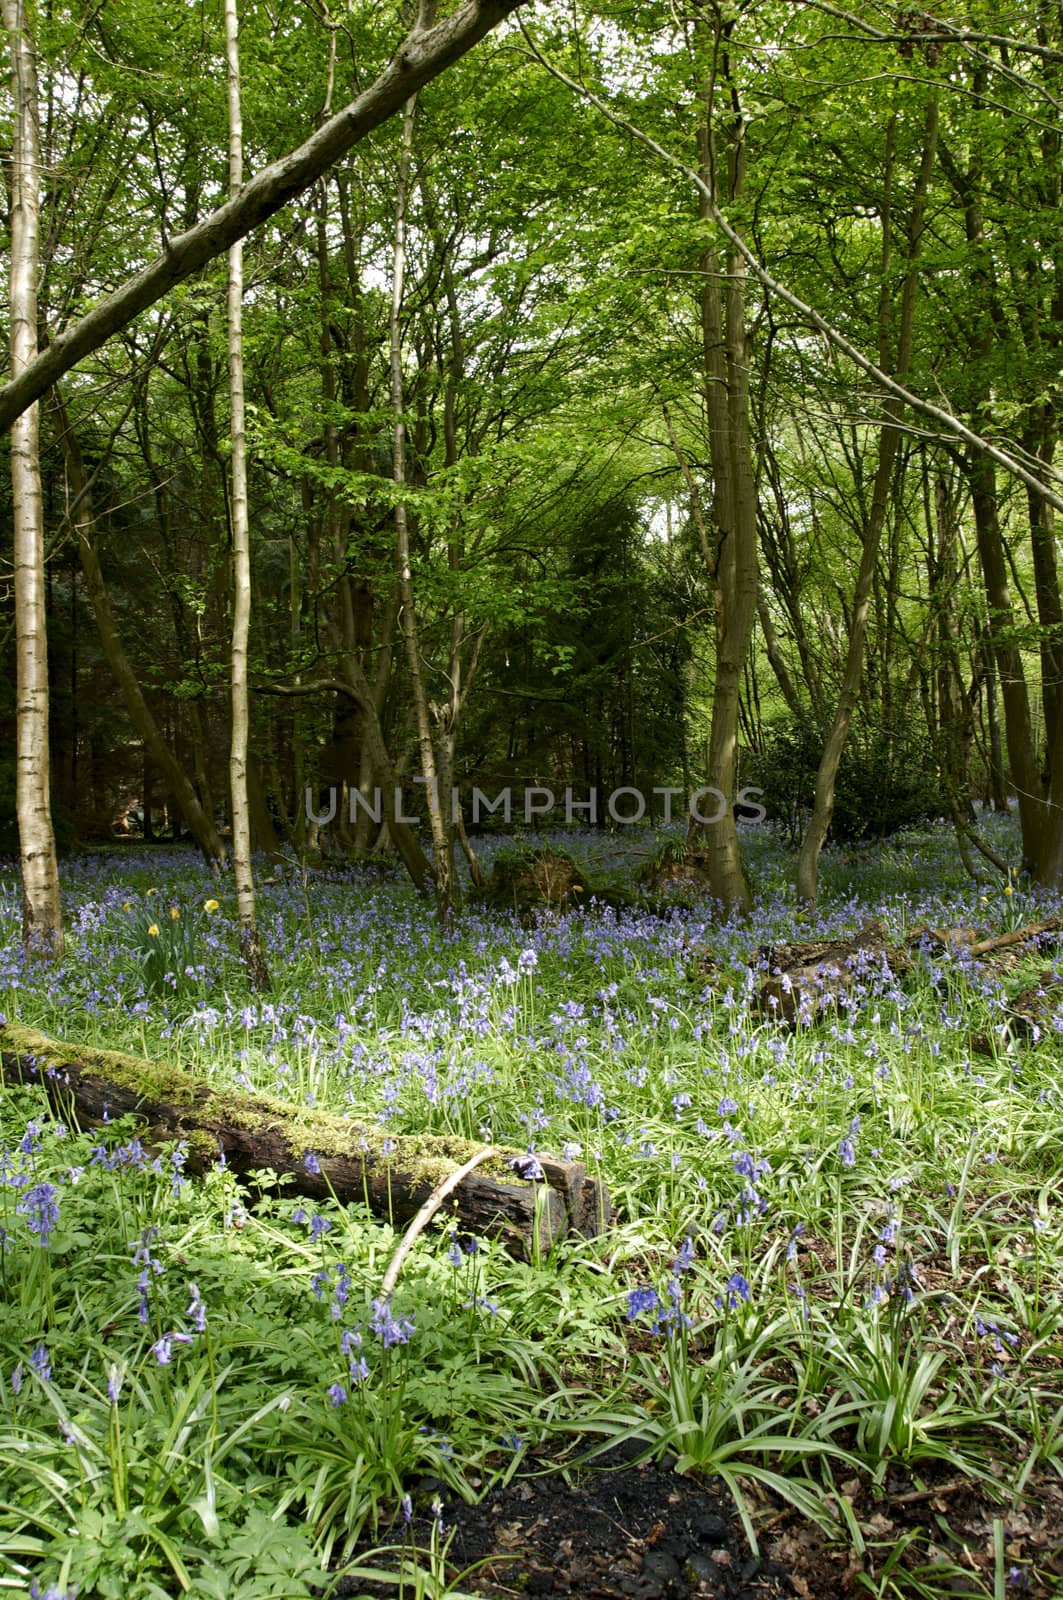 Bluebell in a wooland setting in spring